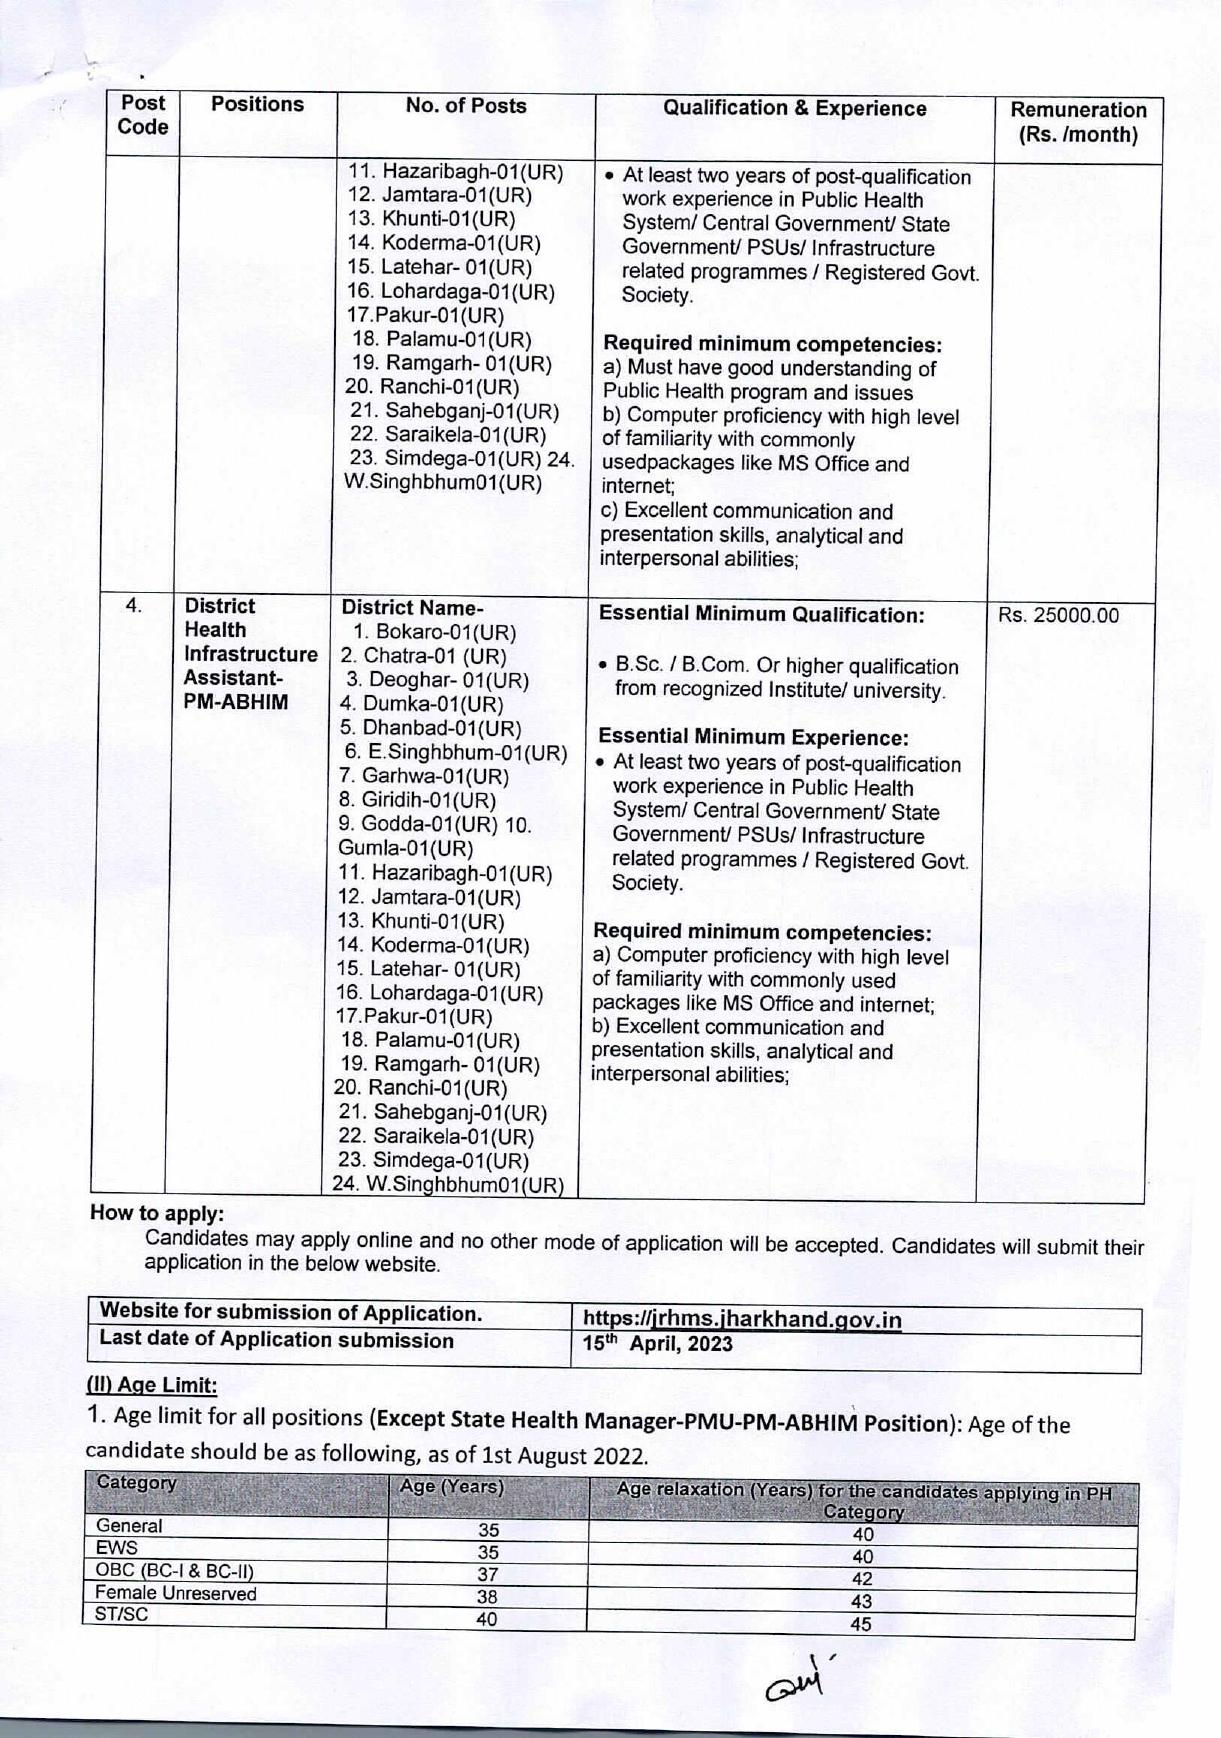 NHM Jharkhand District Health Infrastructure Manager and Various Posts Recruitment 2023 - Page 5